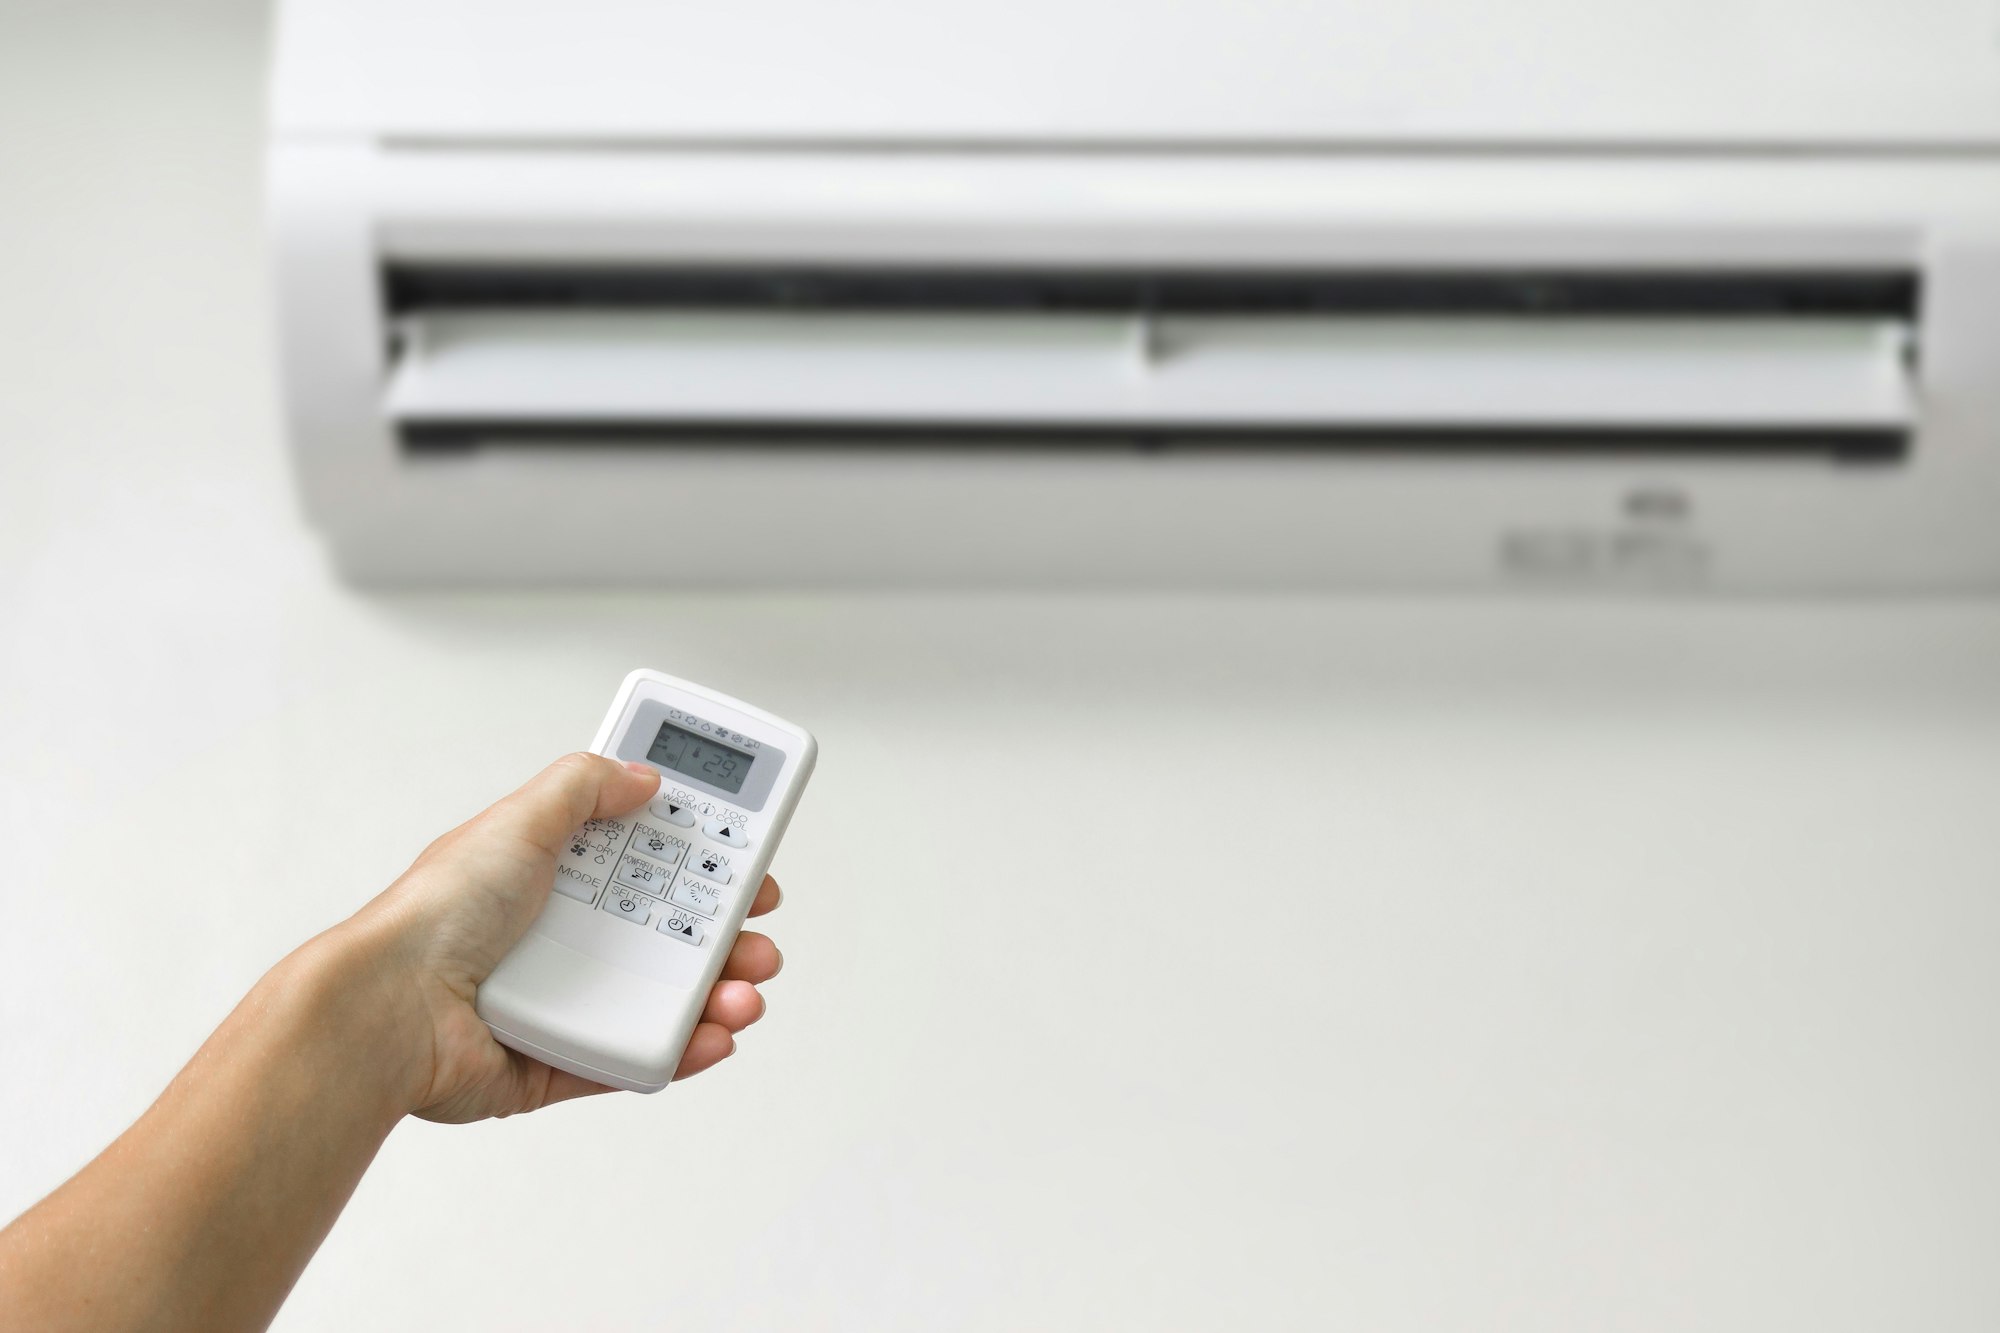 Remote control of the air conditioner AC